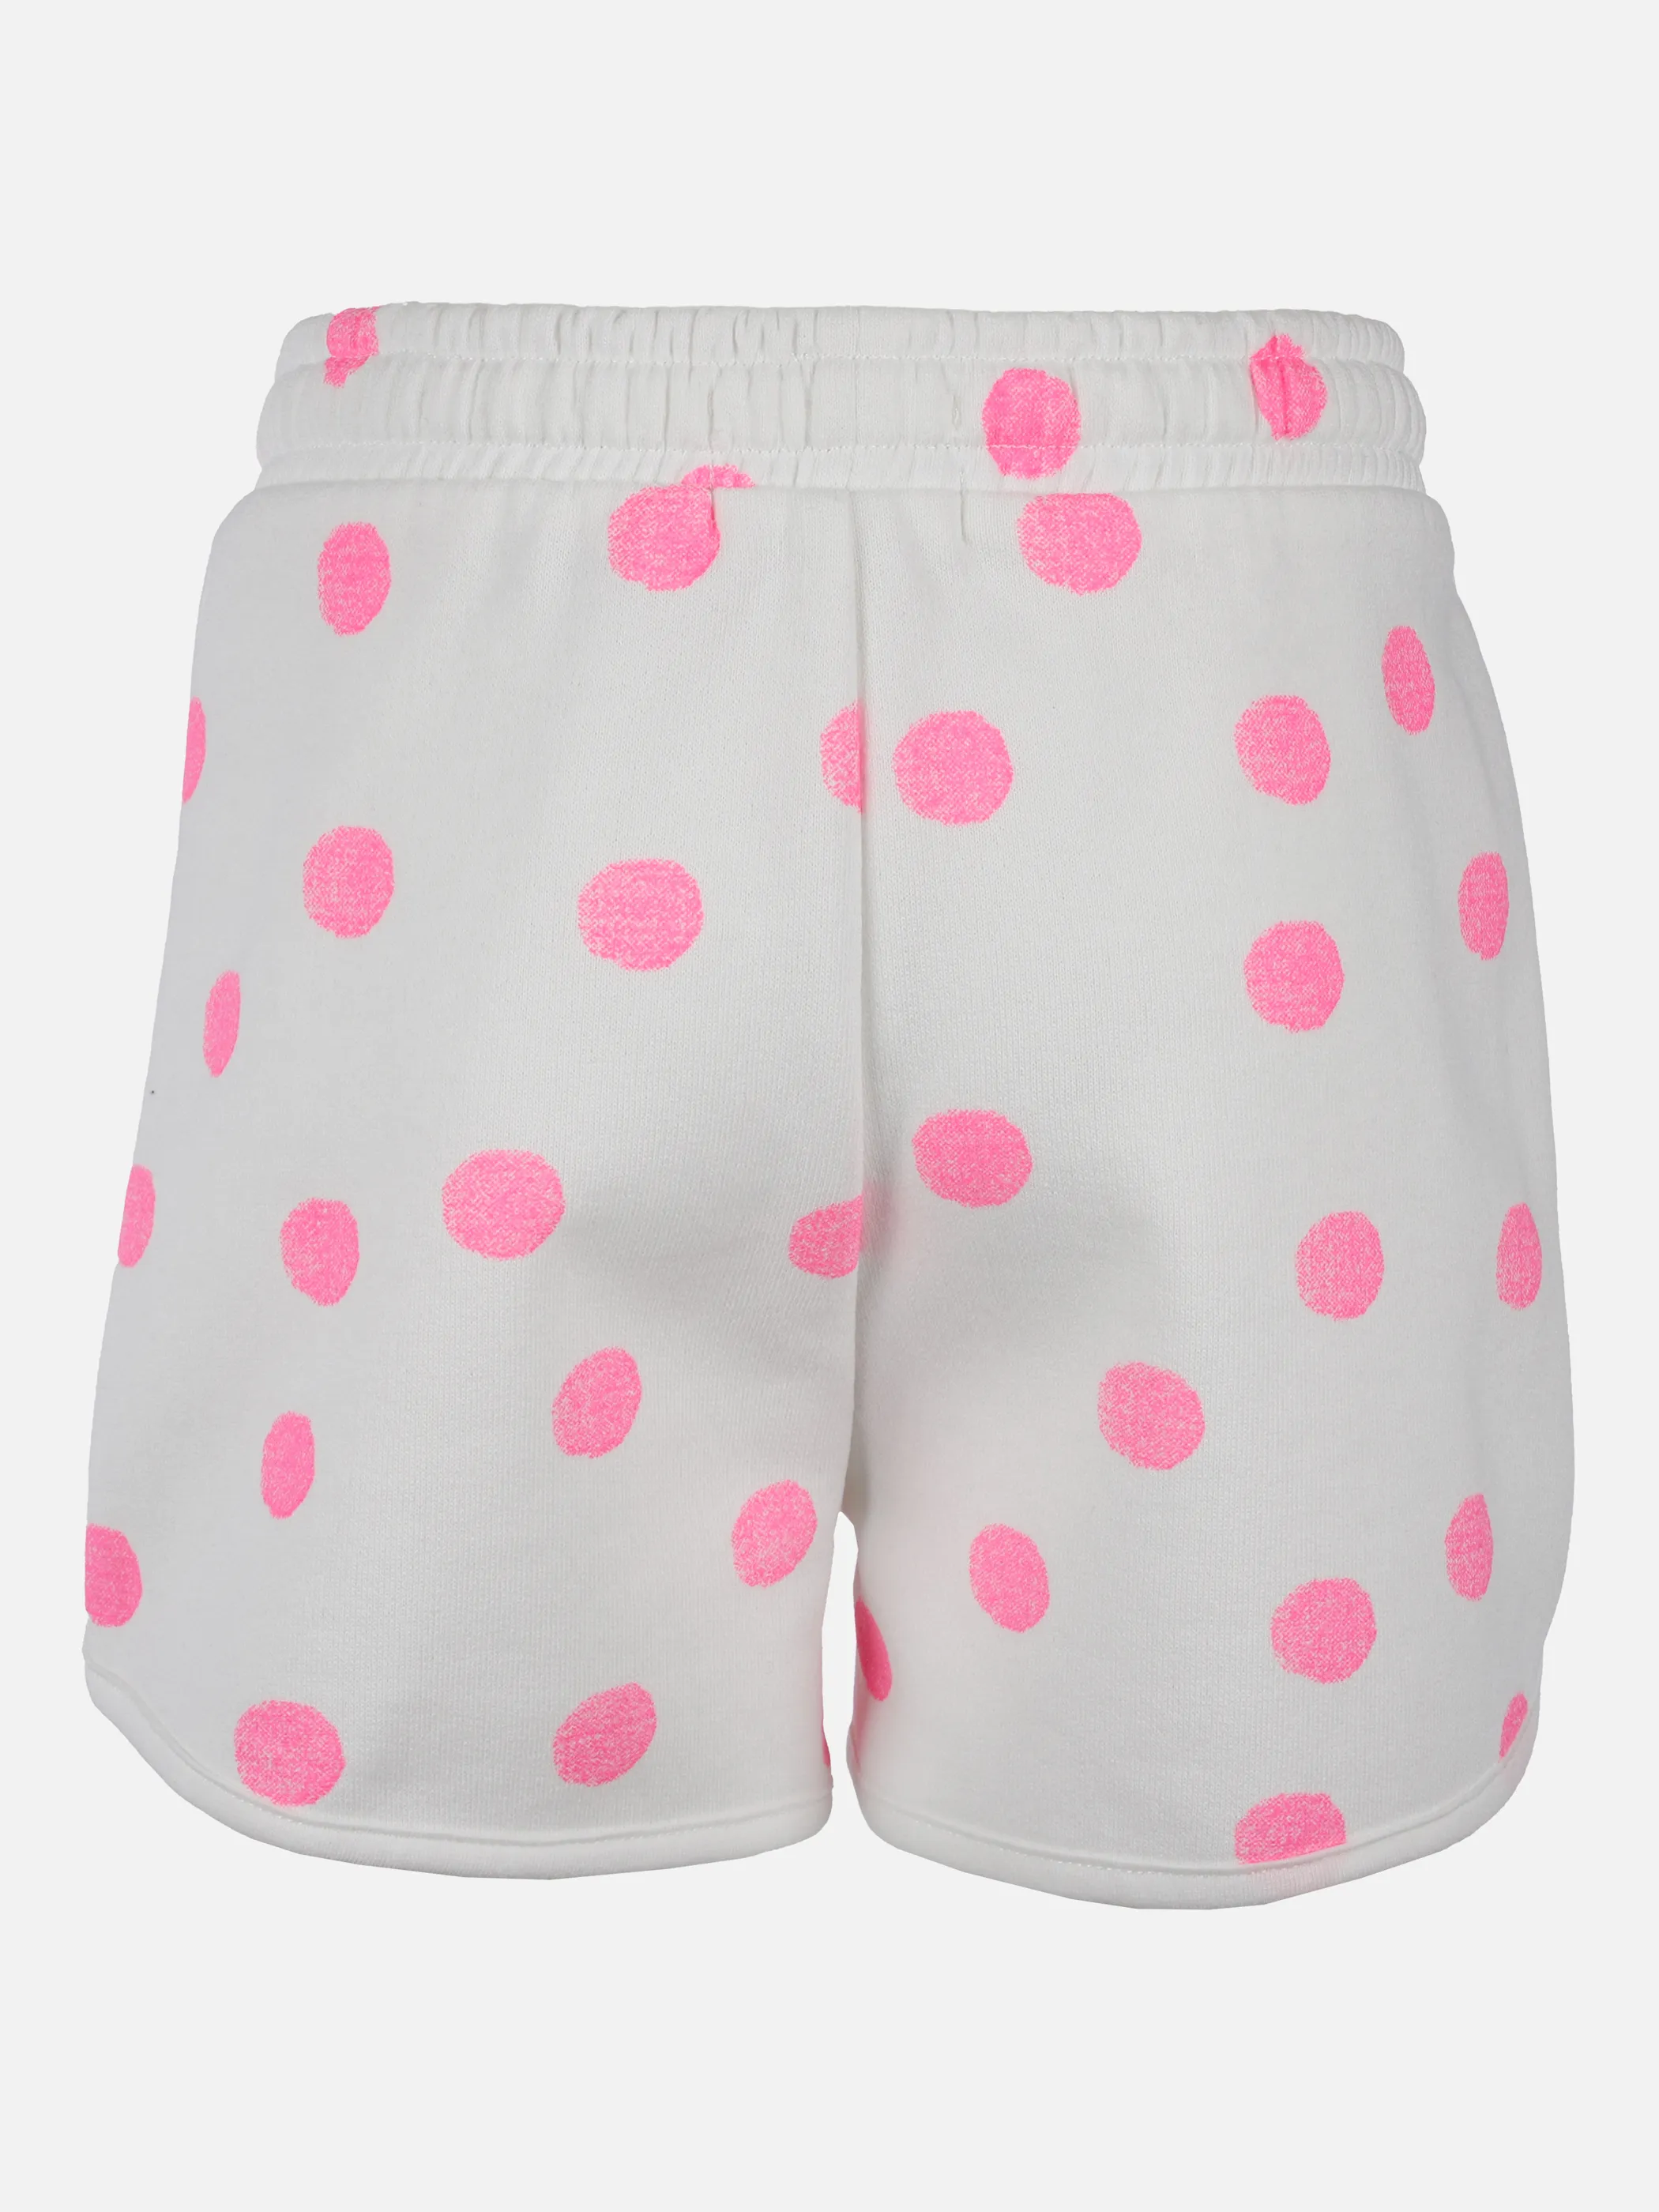 Tom Tailor 1031924 jersey shorts Pink 865852 29921 2